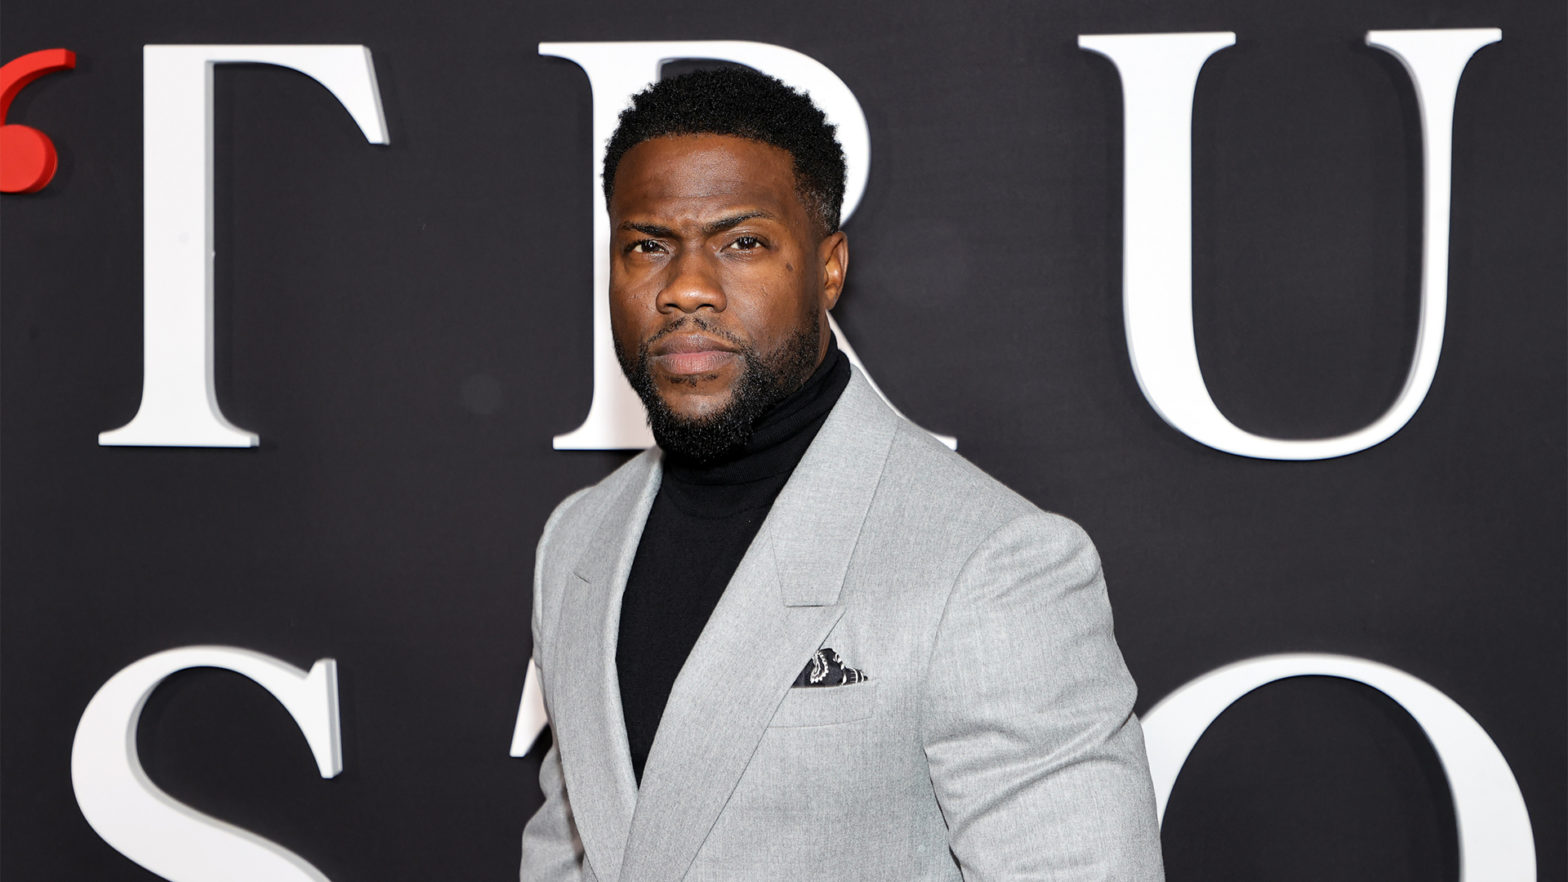 Kevin Hart Went From Seeing Investing As A 'Con' To Receiving An Institutional Investment From The Largest Bank In The U.S.